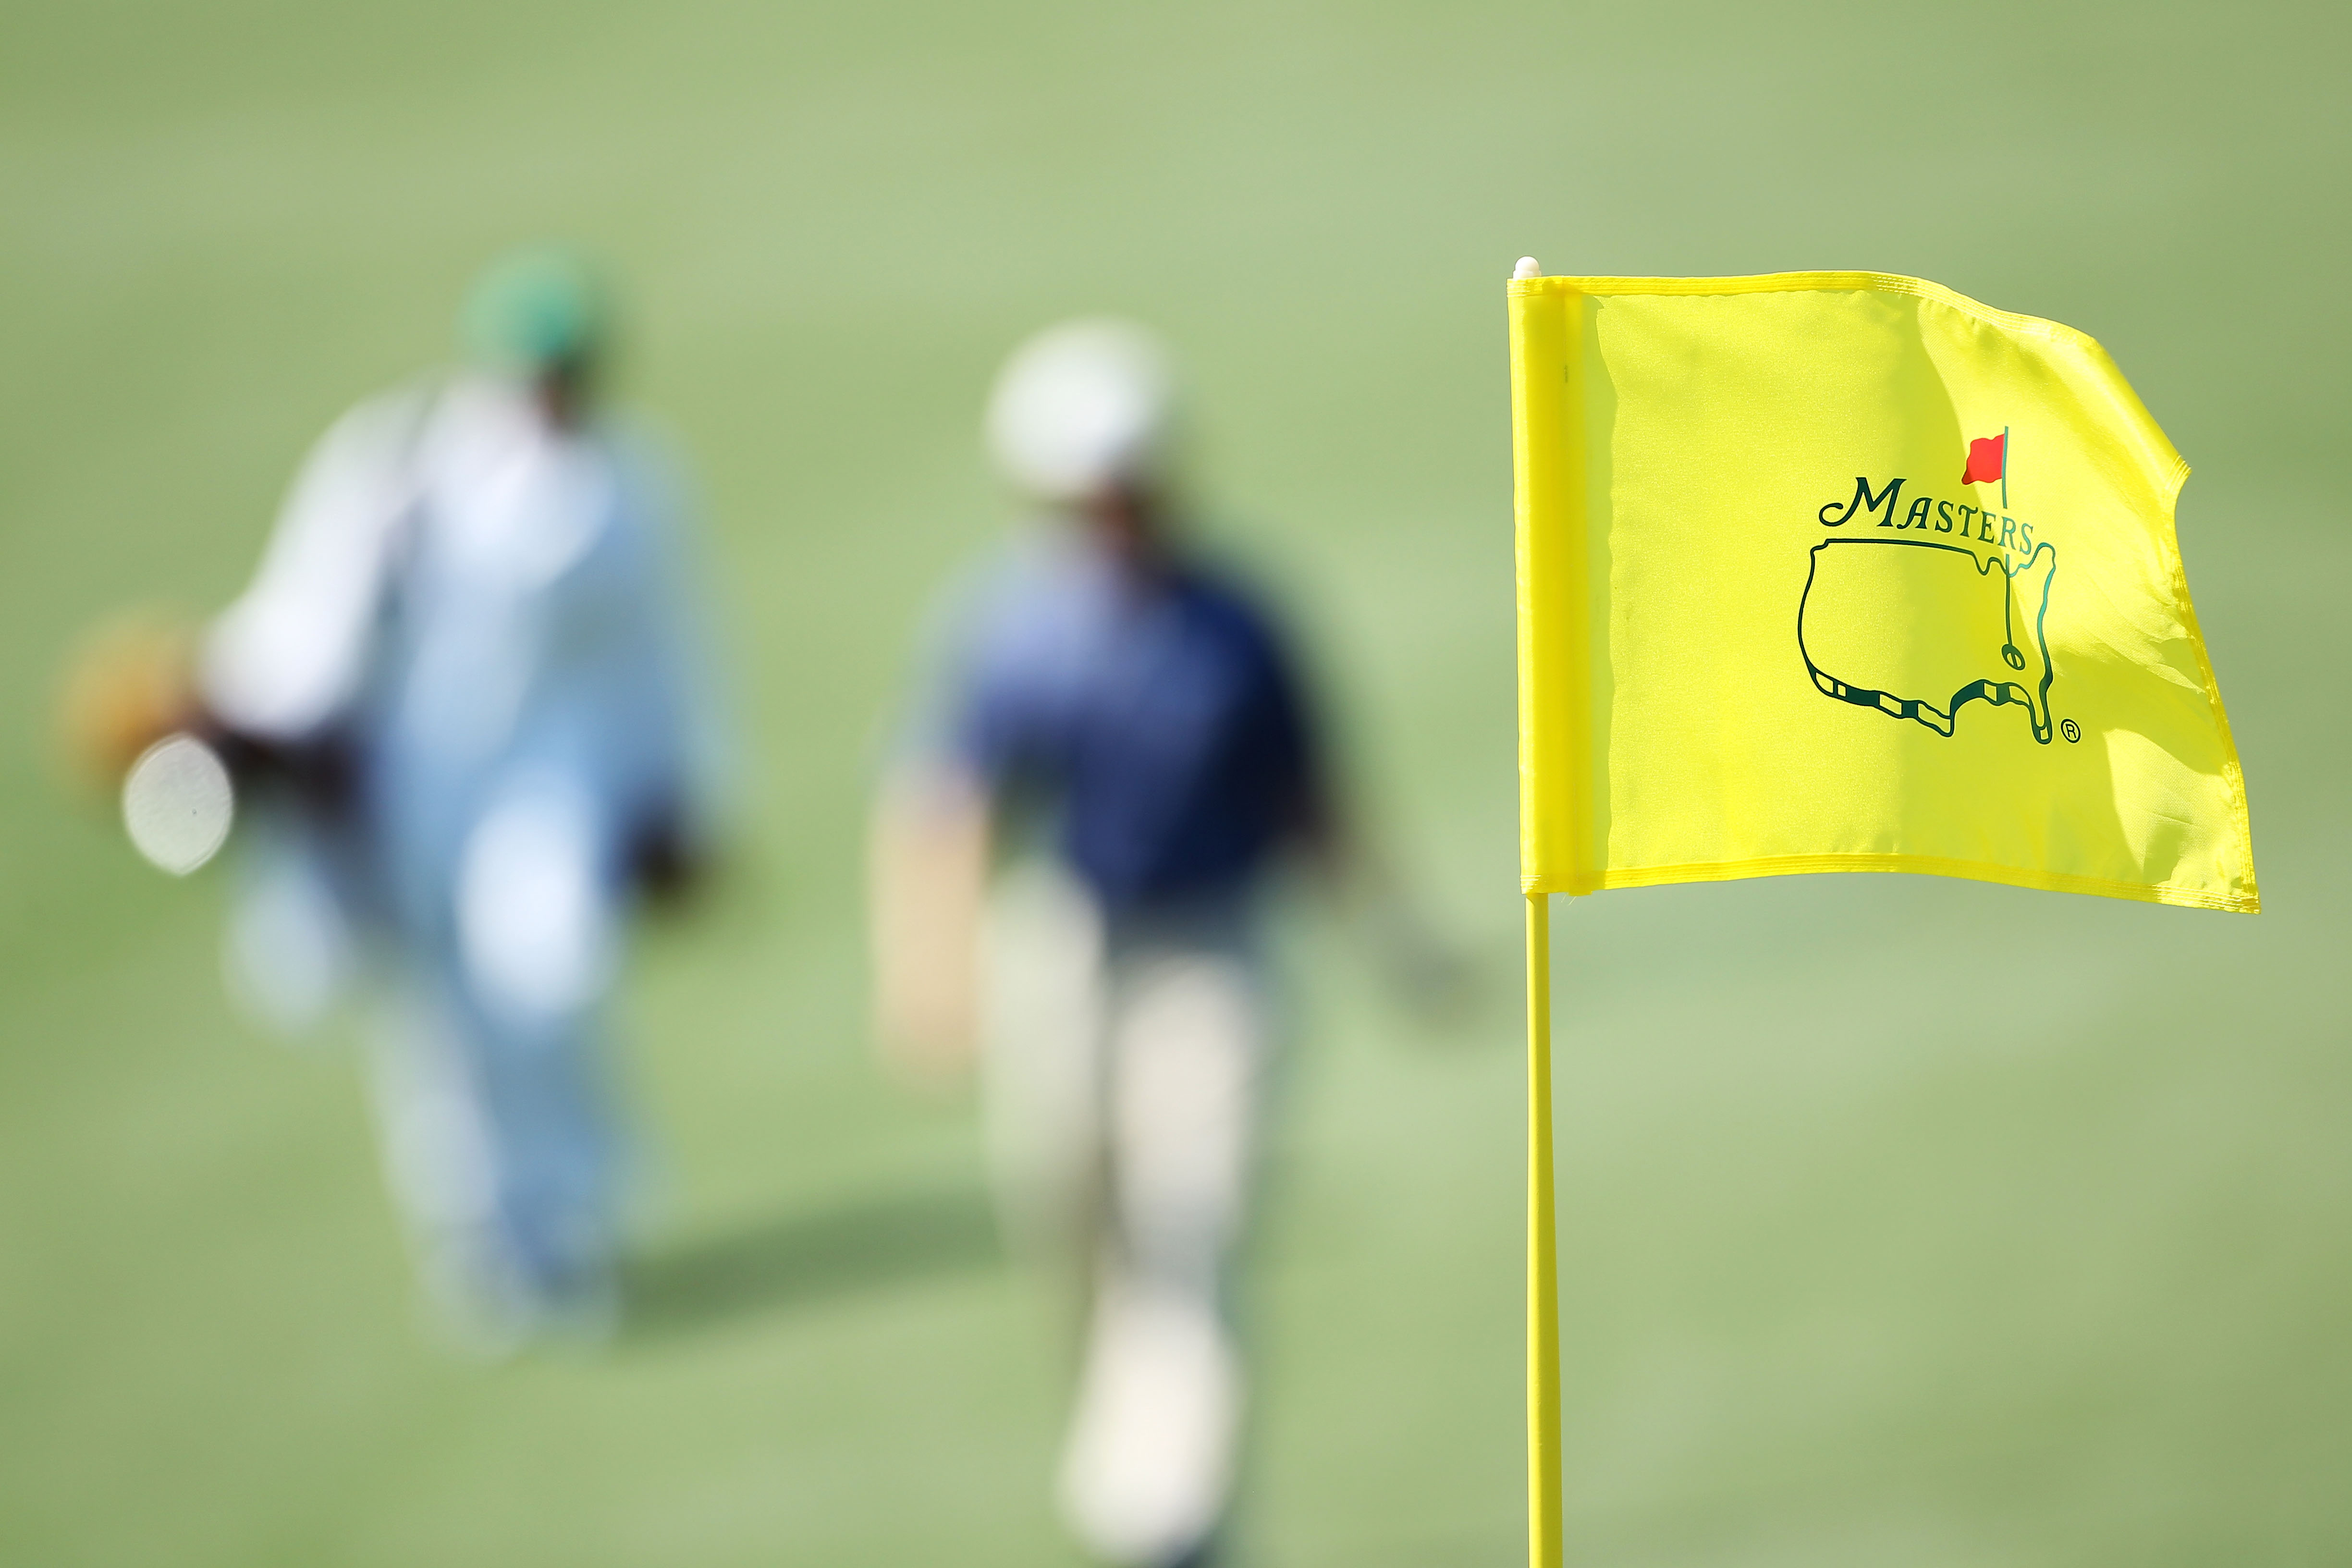 AUGUSTA, GA - APRIL 04:  A Masters flagstick is seen as a player and caddie approach a green during a practice round prior to the 2011 Masters Tournament at Augusta National Golf Club on April 4, 2011 in Augusta, Georgia.  (Photo by Andrew Redington/Getty